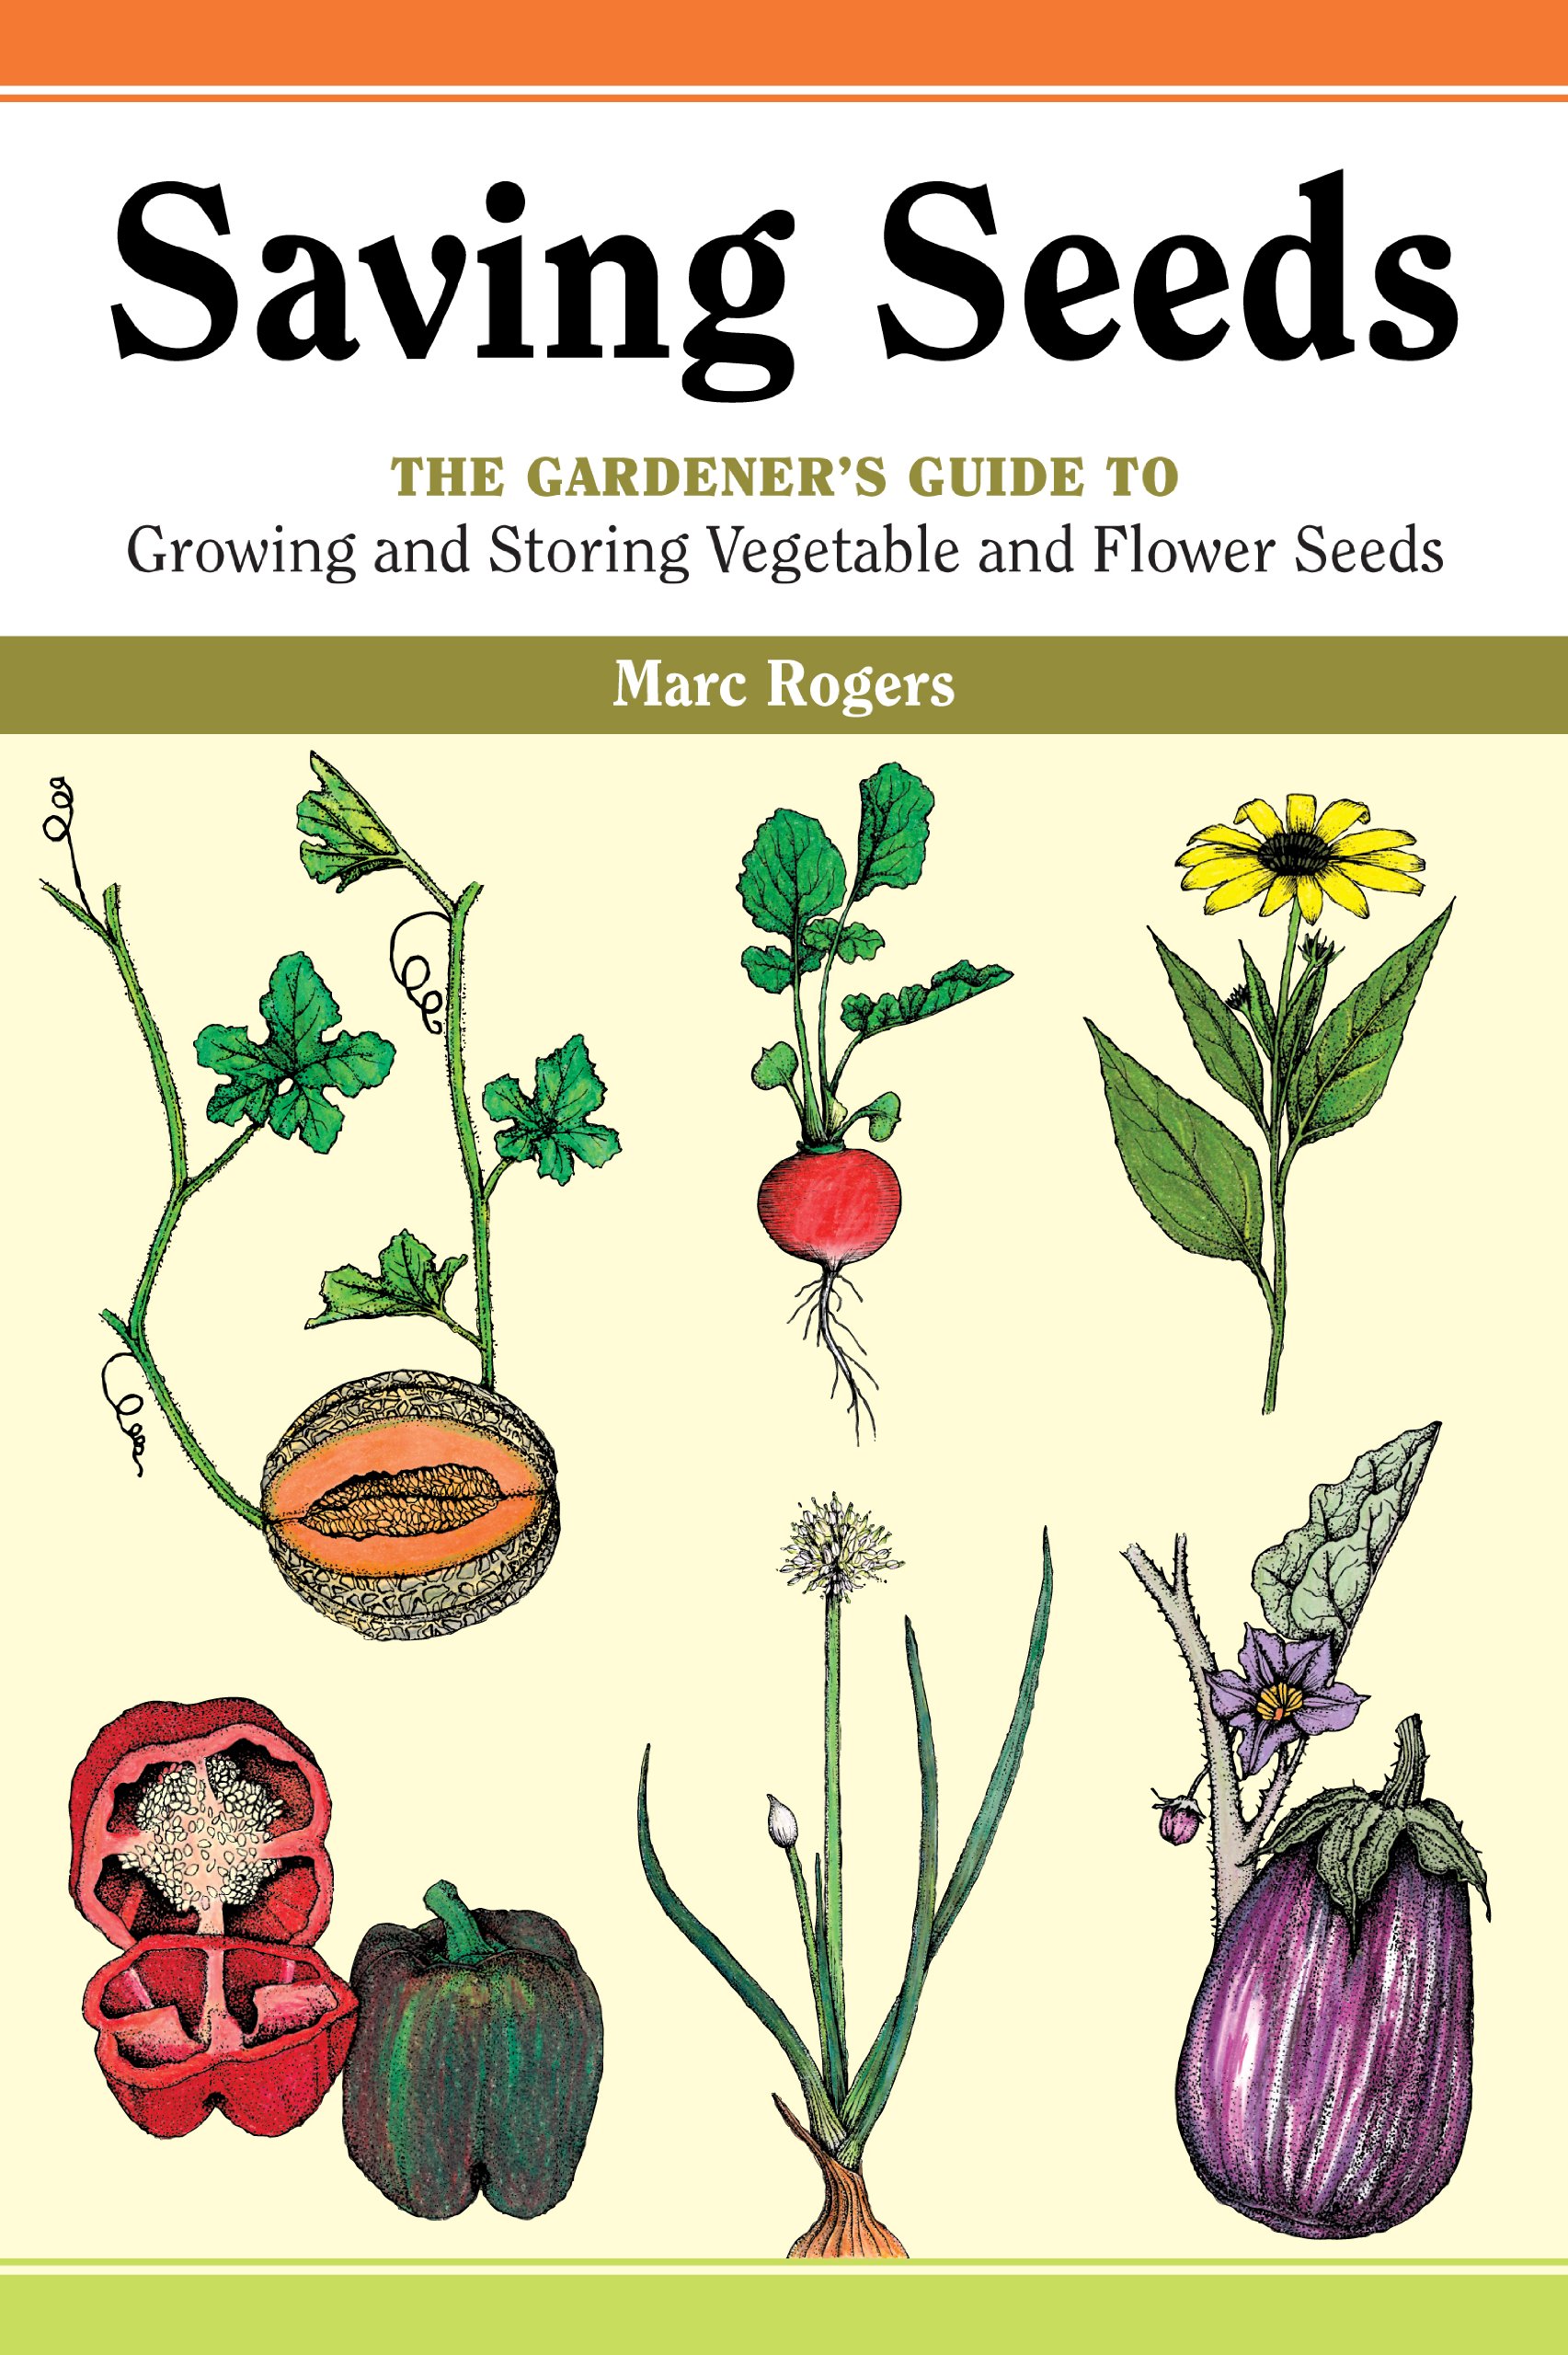 Saving Seeds: The Gardener's Guide to Growing and Storing Vegetable and Flower Seeds